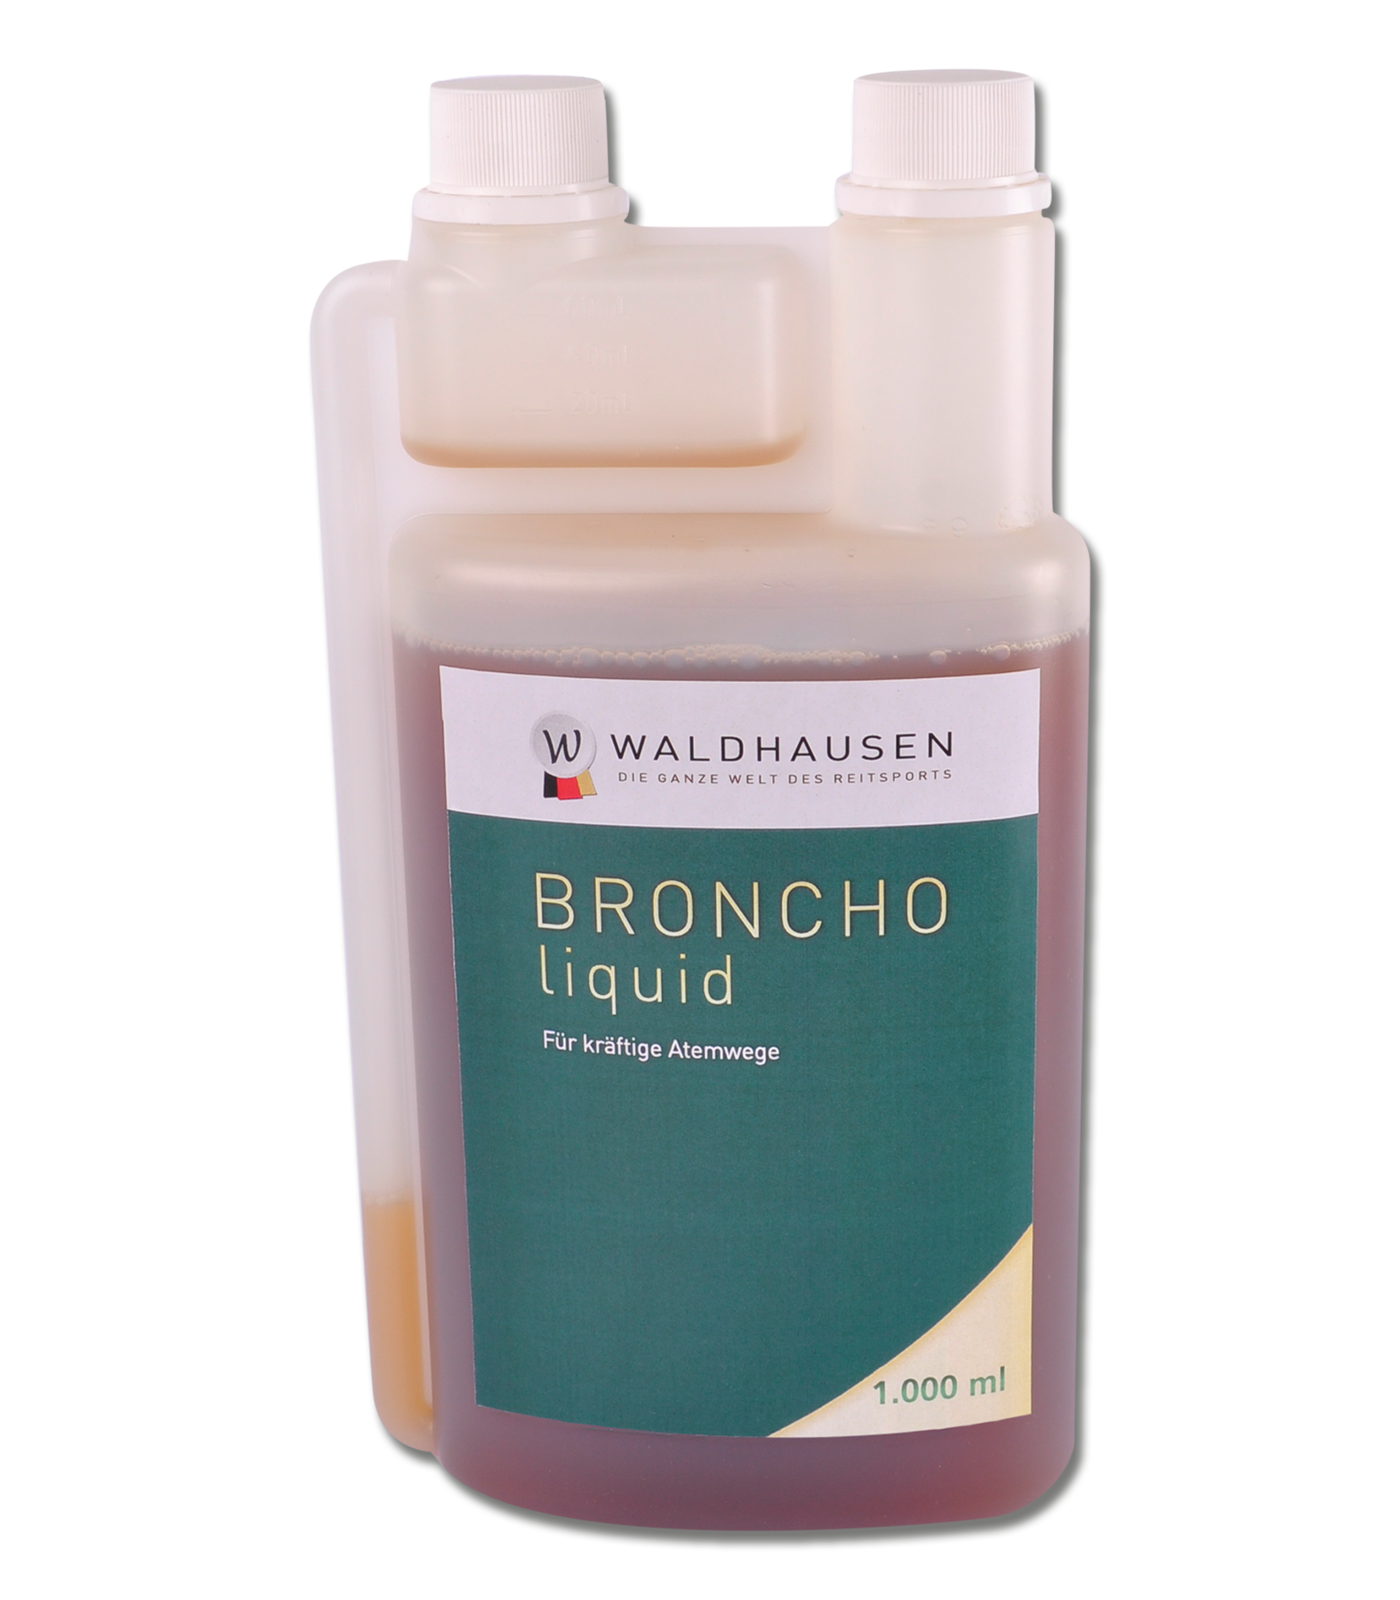 Broncho liquid - Good for the respiratory tract, 1l